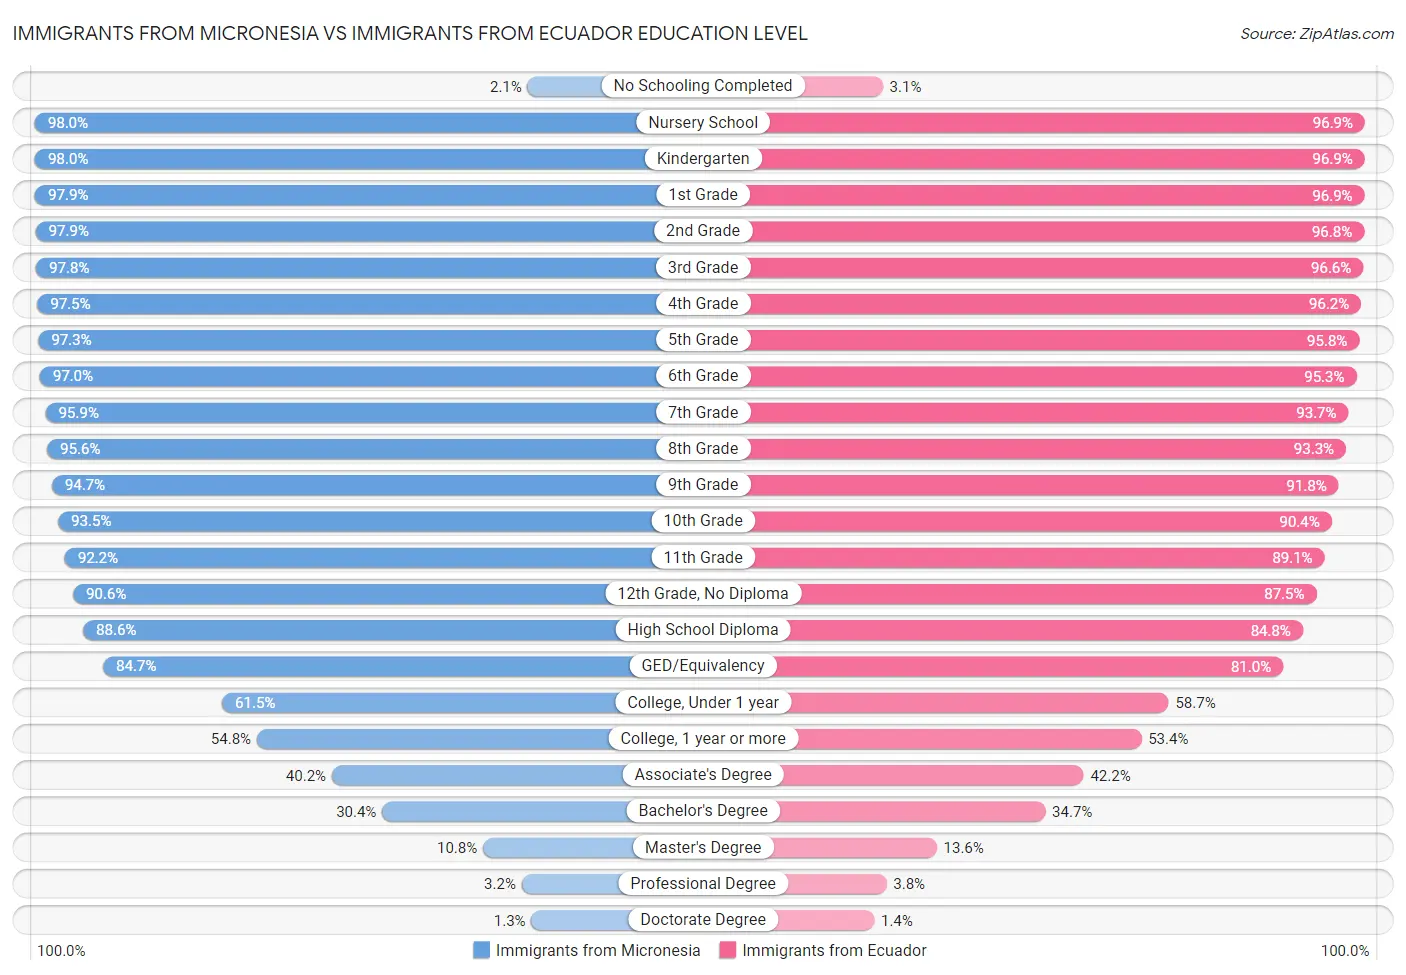 Immigrants from Micronesia vs Immigrants from Ecuador Education Level